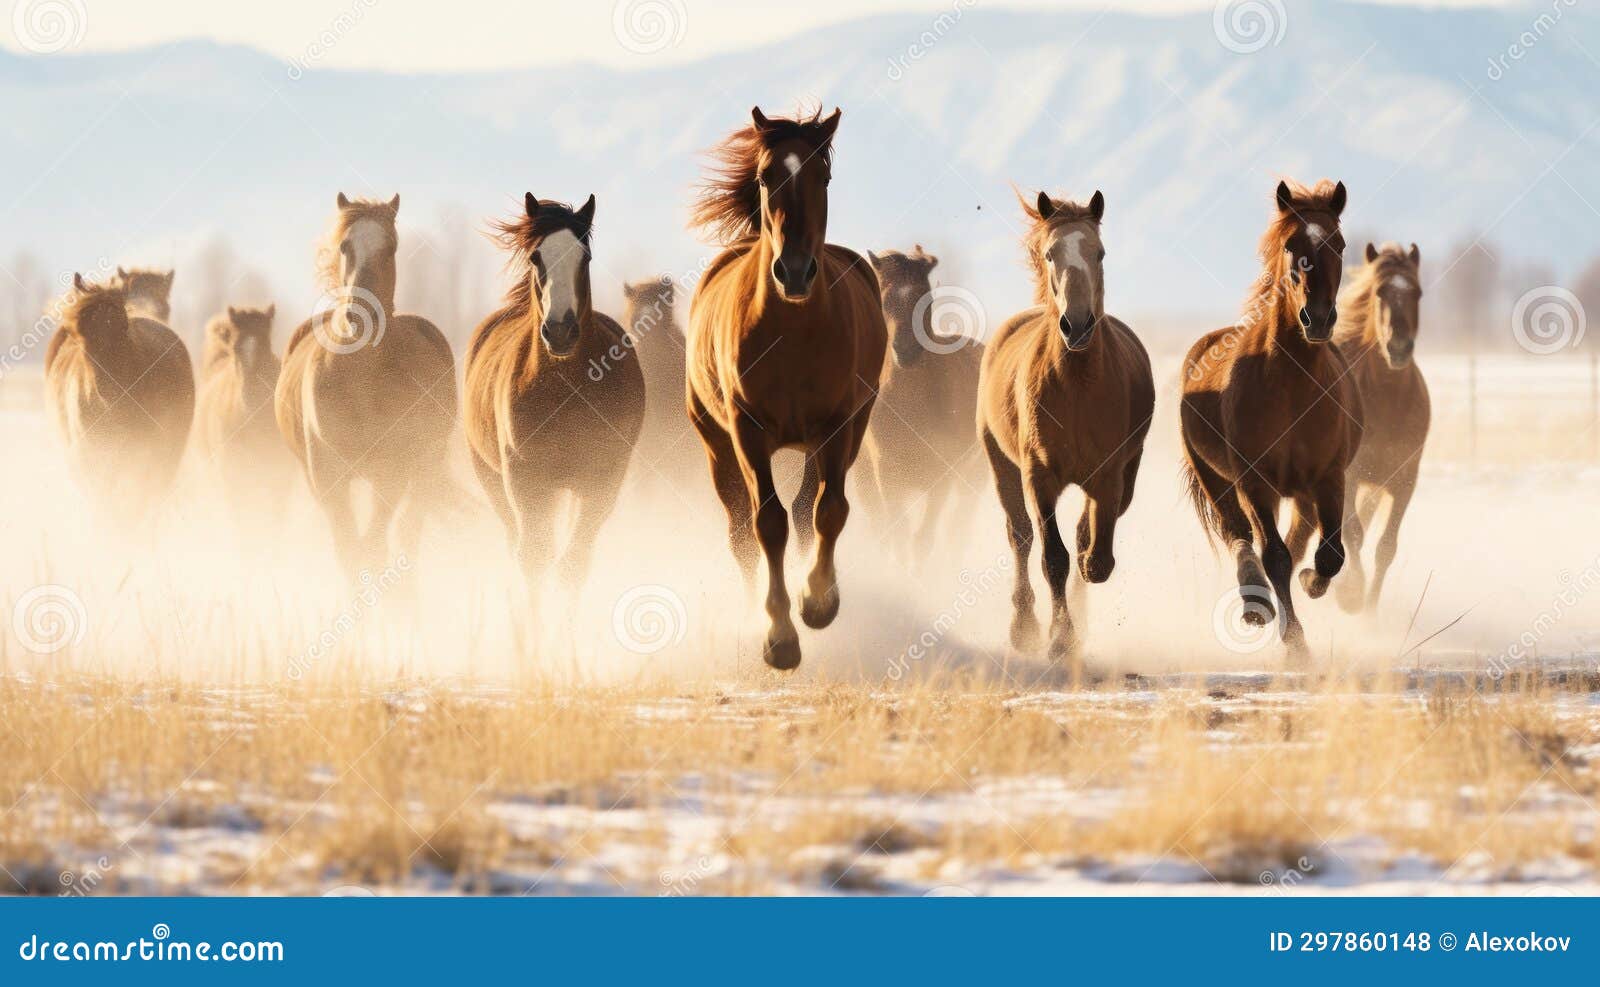 minimalistic image of rodeo horses running through winter meadow in kalispell, montana ai generated